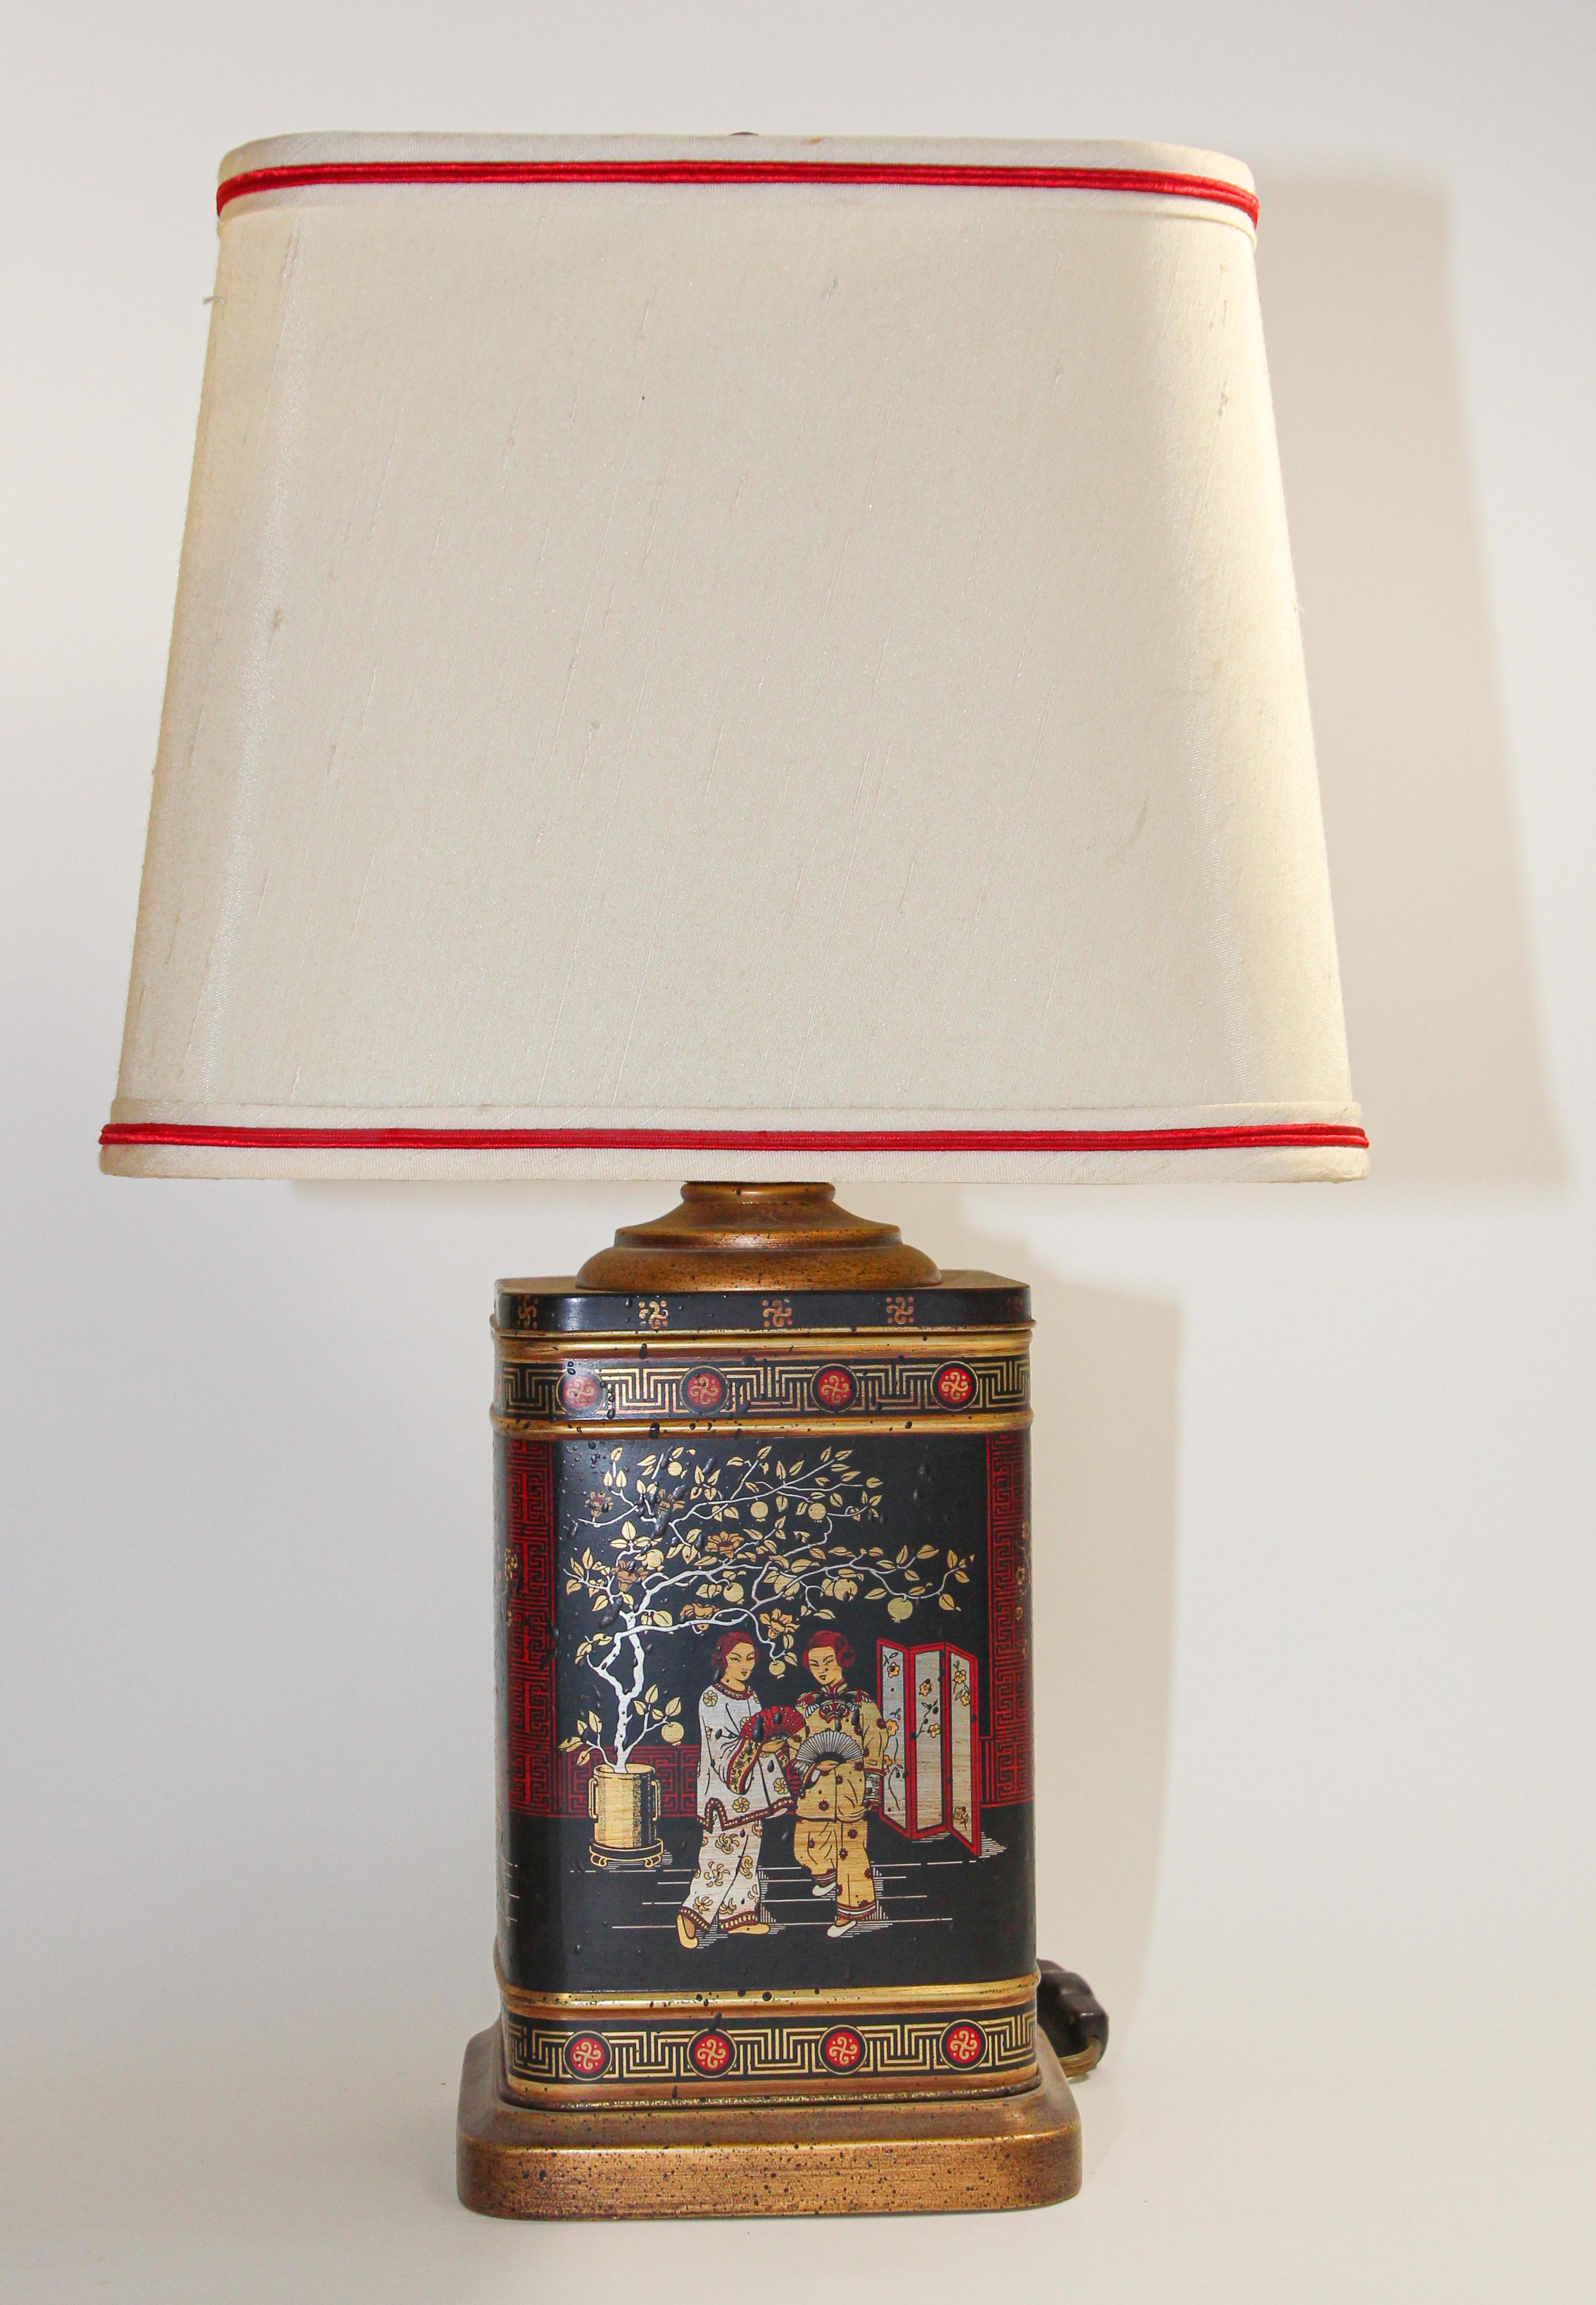 Set of two vintage 1950’s Frederick Cooper Chinoiserie table lamps.
Vintage Frederick Cooper Asian tea tin canister turned into table Lamps,
Vintage table lamps, one large, one smaller made by Frederick Cooper Chicago.
Set on gold finish wooden base